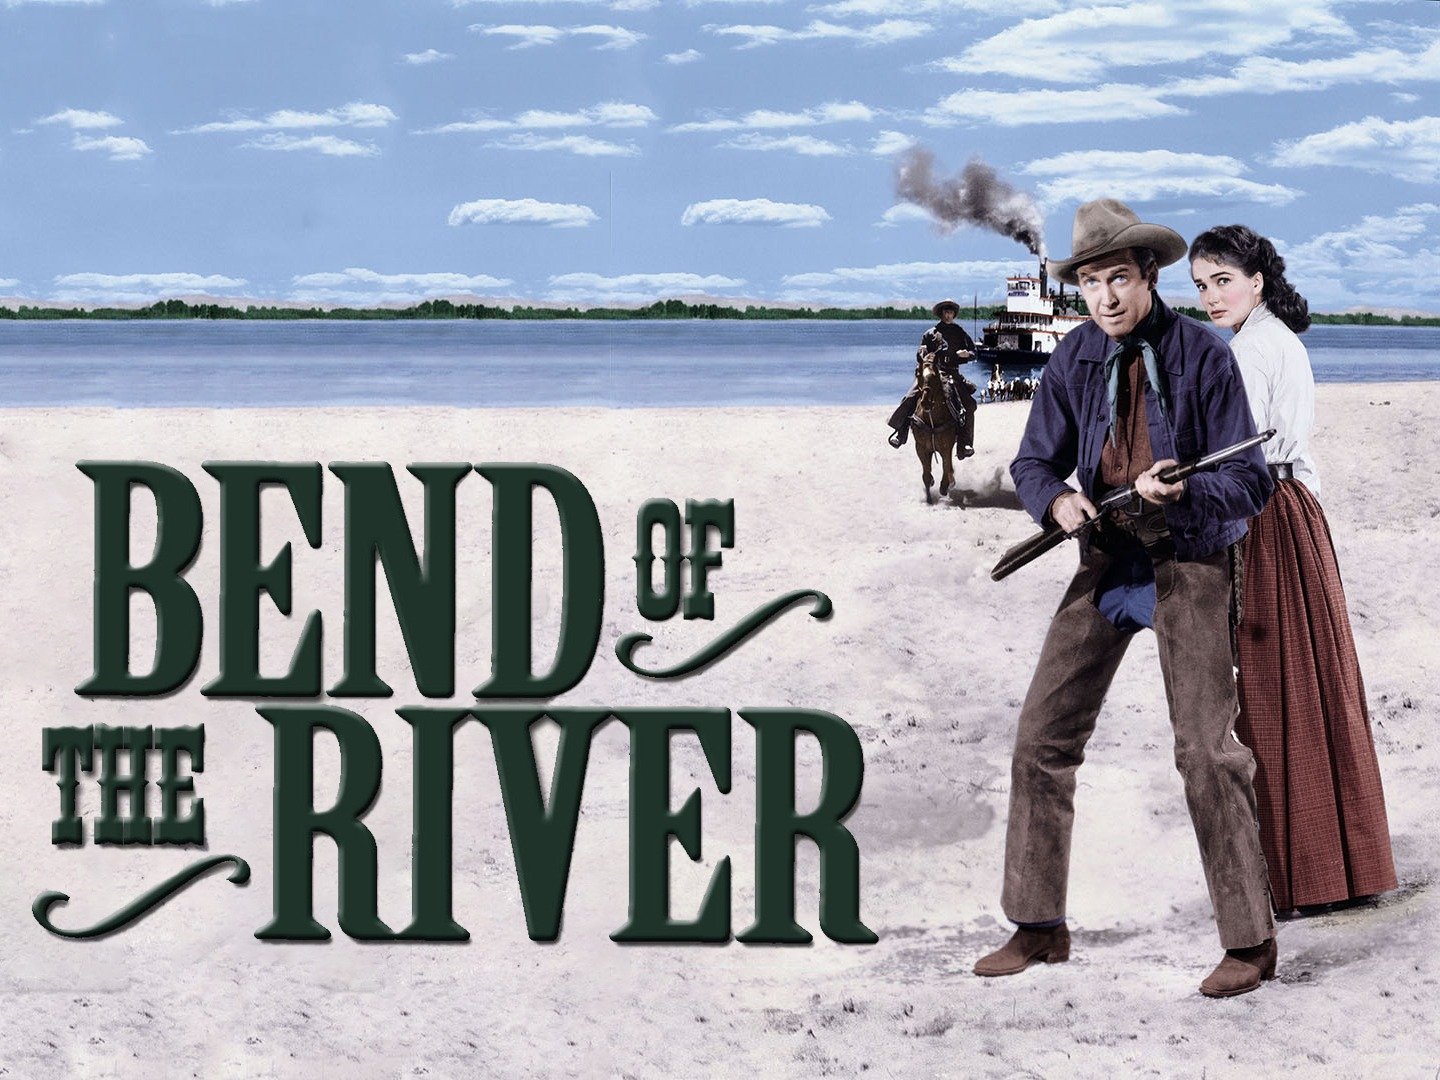 38-facts-about-the-movie-bend-of-the-river